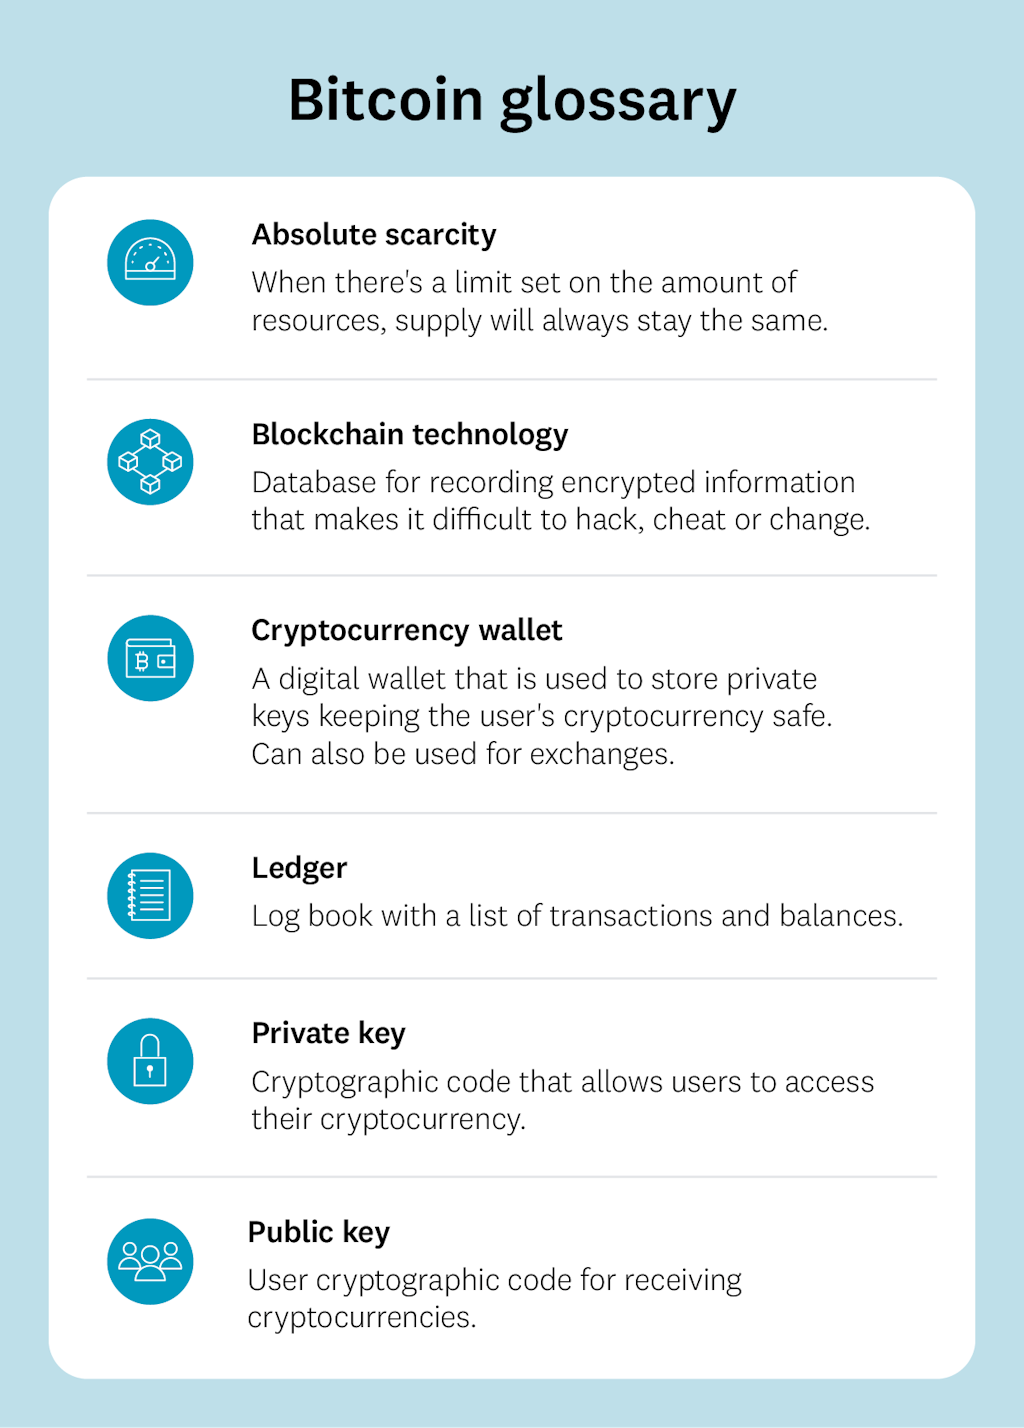 Bitcoin glossary with the following terms and their explanations:
Absolute scarcity — When there's a limit set on the amount of resources, supply will always stay the same.
Blockchain technology — Database for recording encrypted information that makes it difficult to hack, cheat or change.
Cryptocurrency wallet — A digital wallet that is used to store private keys that keep the user's cryptocurrency safe. Can also be used for exchanges.
Ledger — Log book with a list of transactions and balances.
Private key — Cryptographic code that allows users to access their cryptocurrency.
Private key — User cryptographic code for receiving cryptocurrencies.
Public key